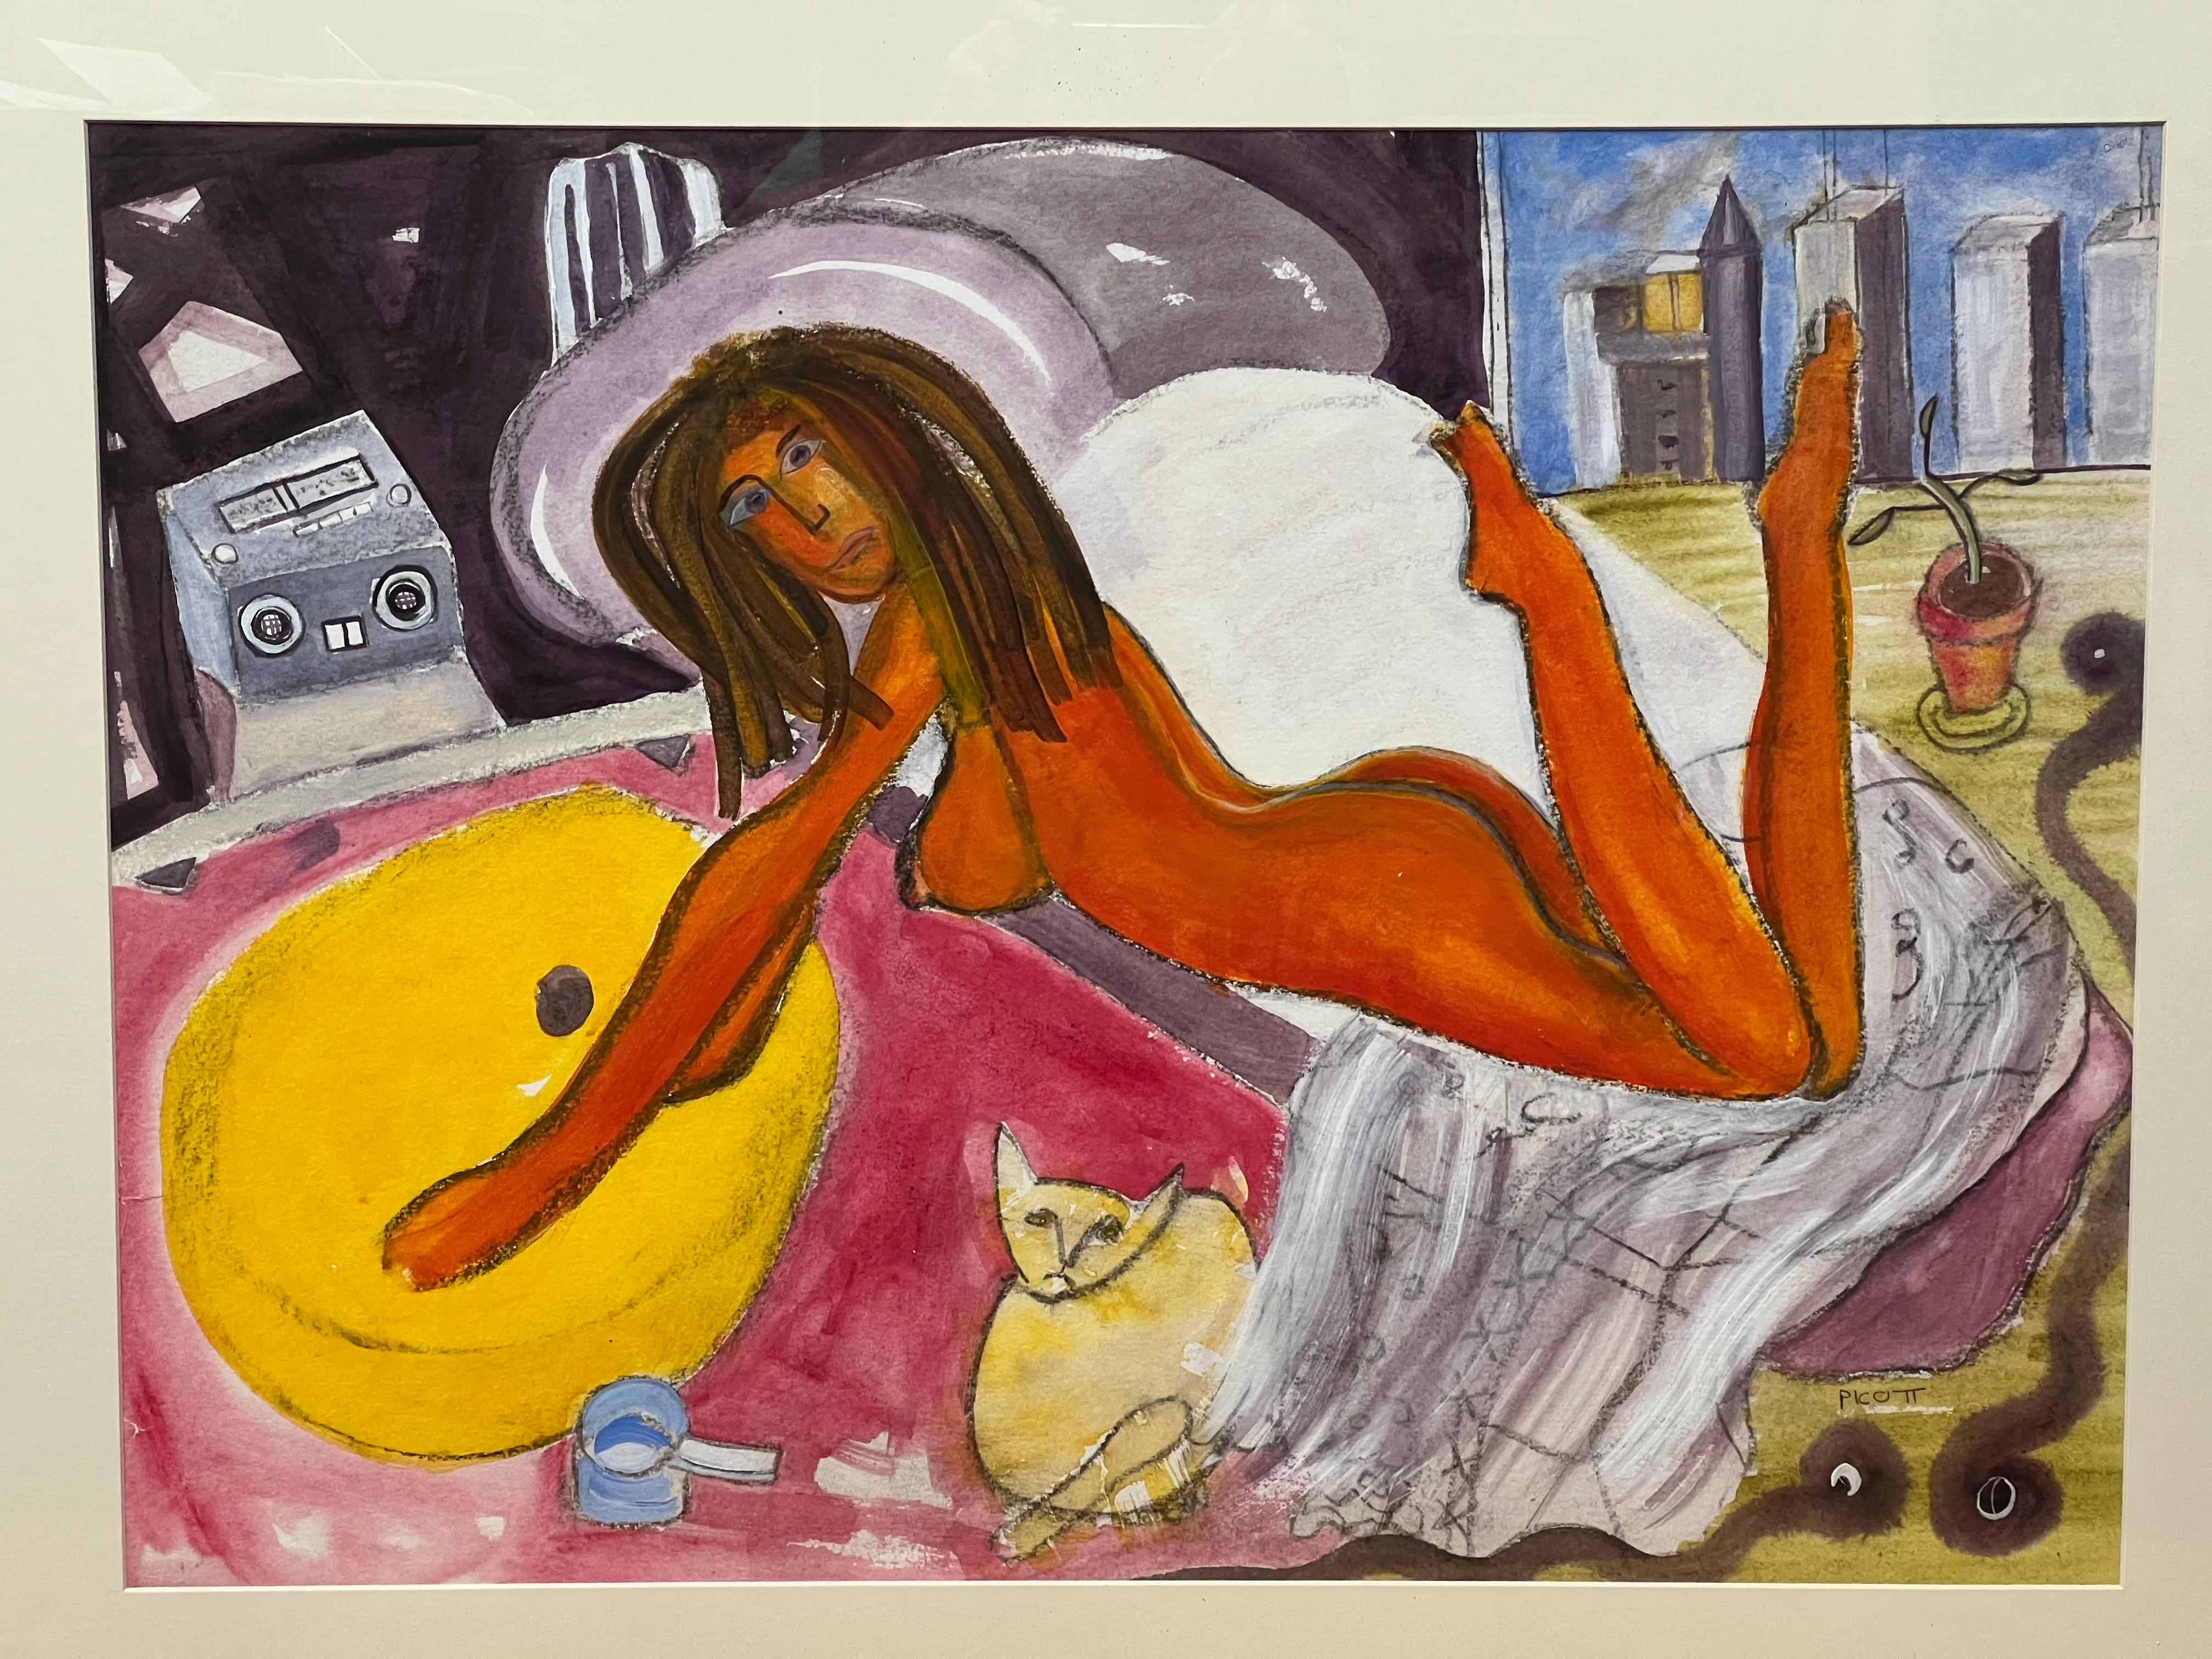 The work is a lively portrayal of an African naked woman in her bedroom. Under the bed, a discontent cat harbors grudges against its owner robbing its yellow cushion. The painting is signed and titled. This is early work since his paintings became